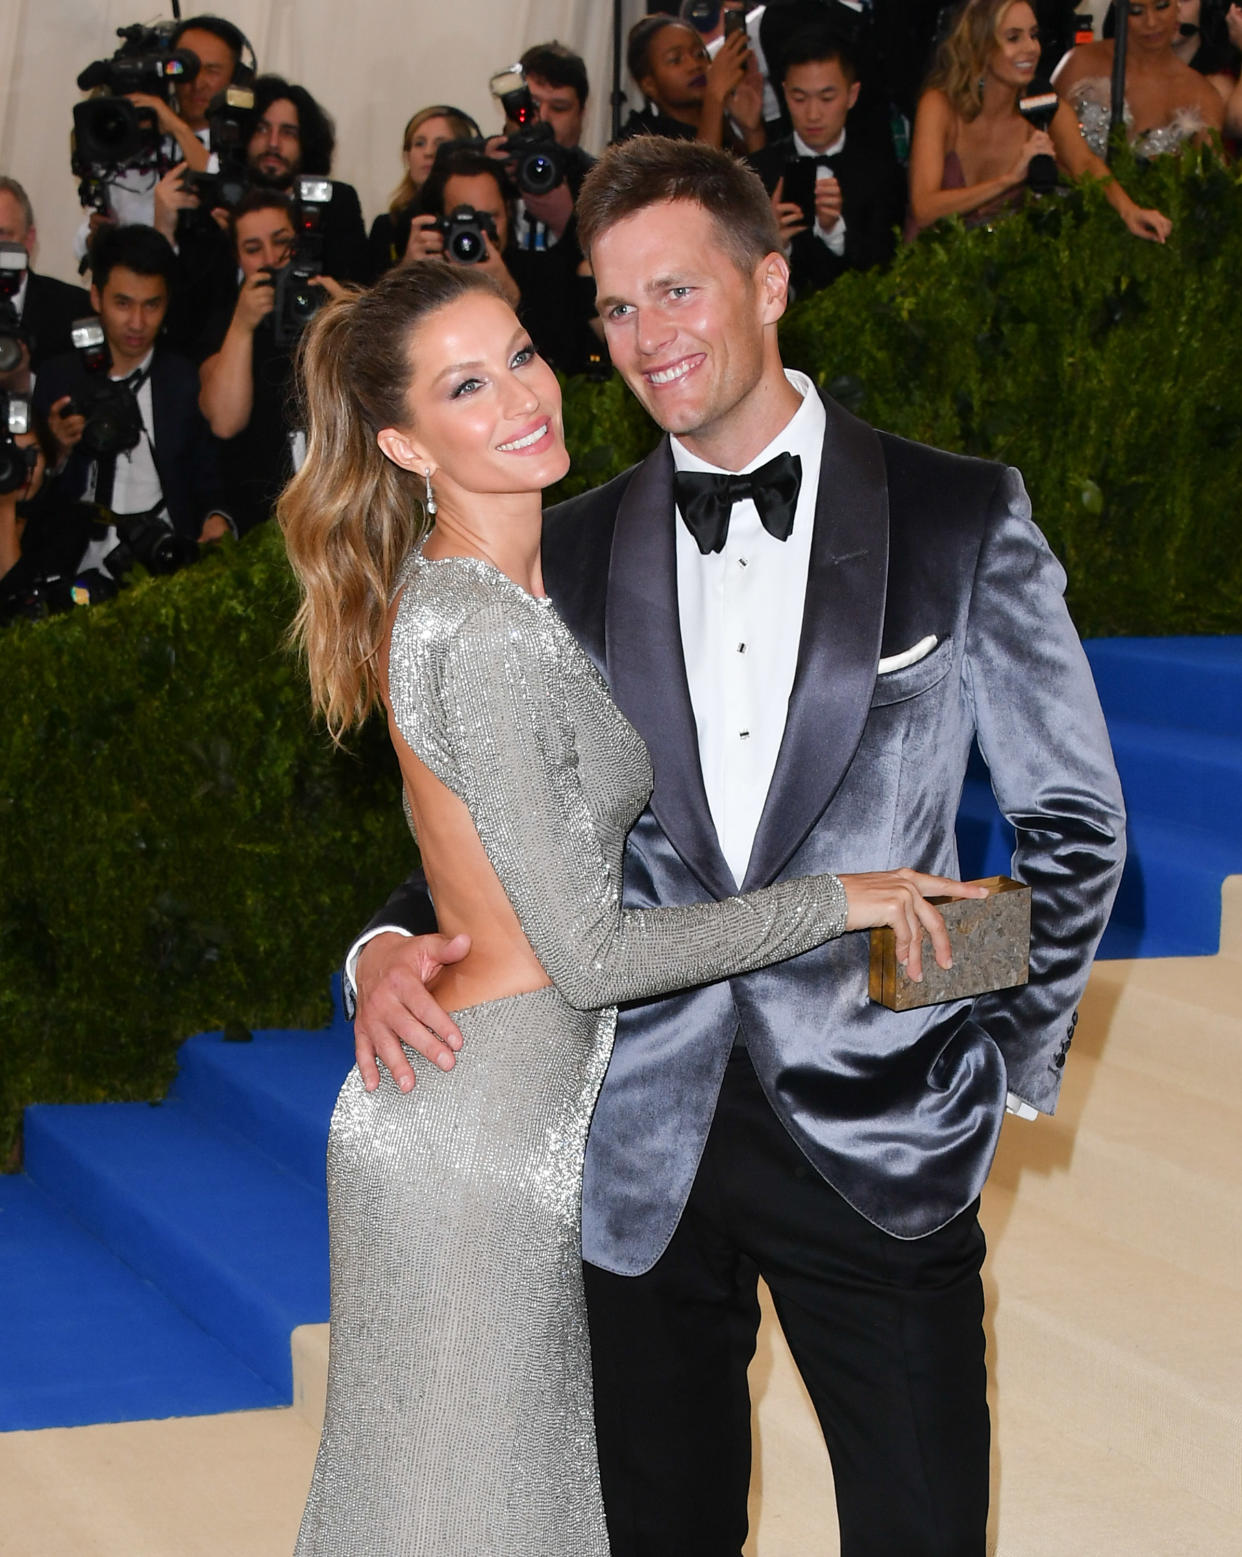 Gisele Bündchen and Tom Brady at the 2017 Met Gala. (Photo: Getty Images)